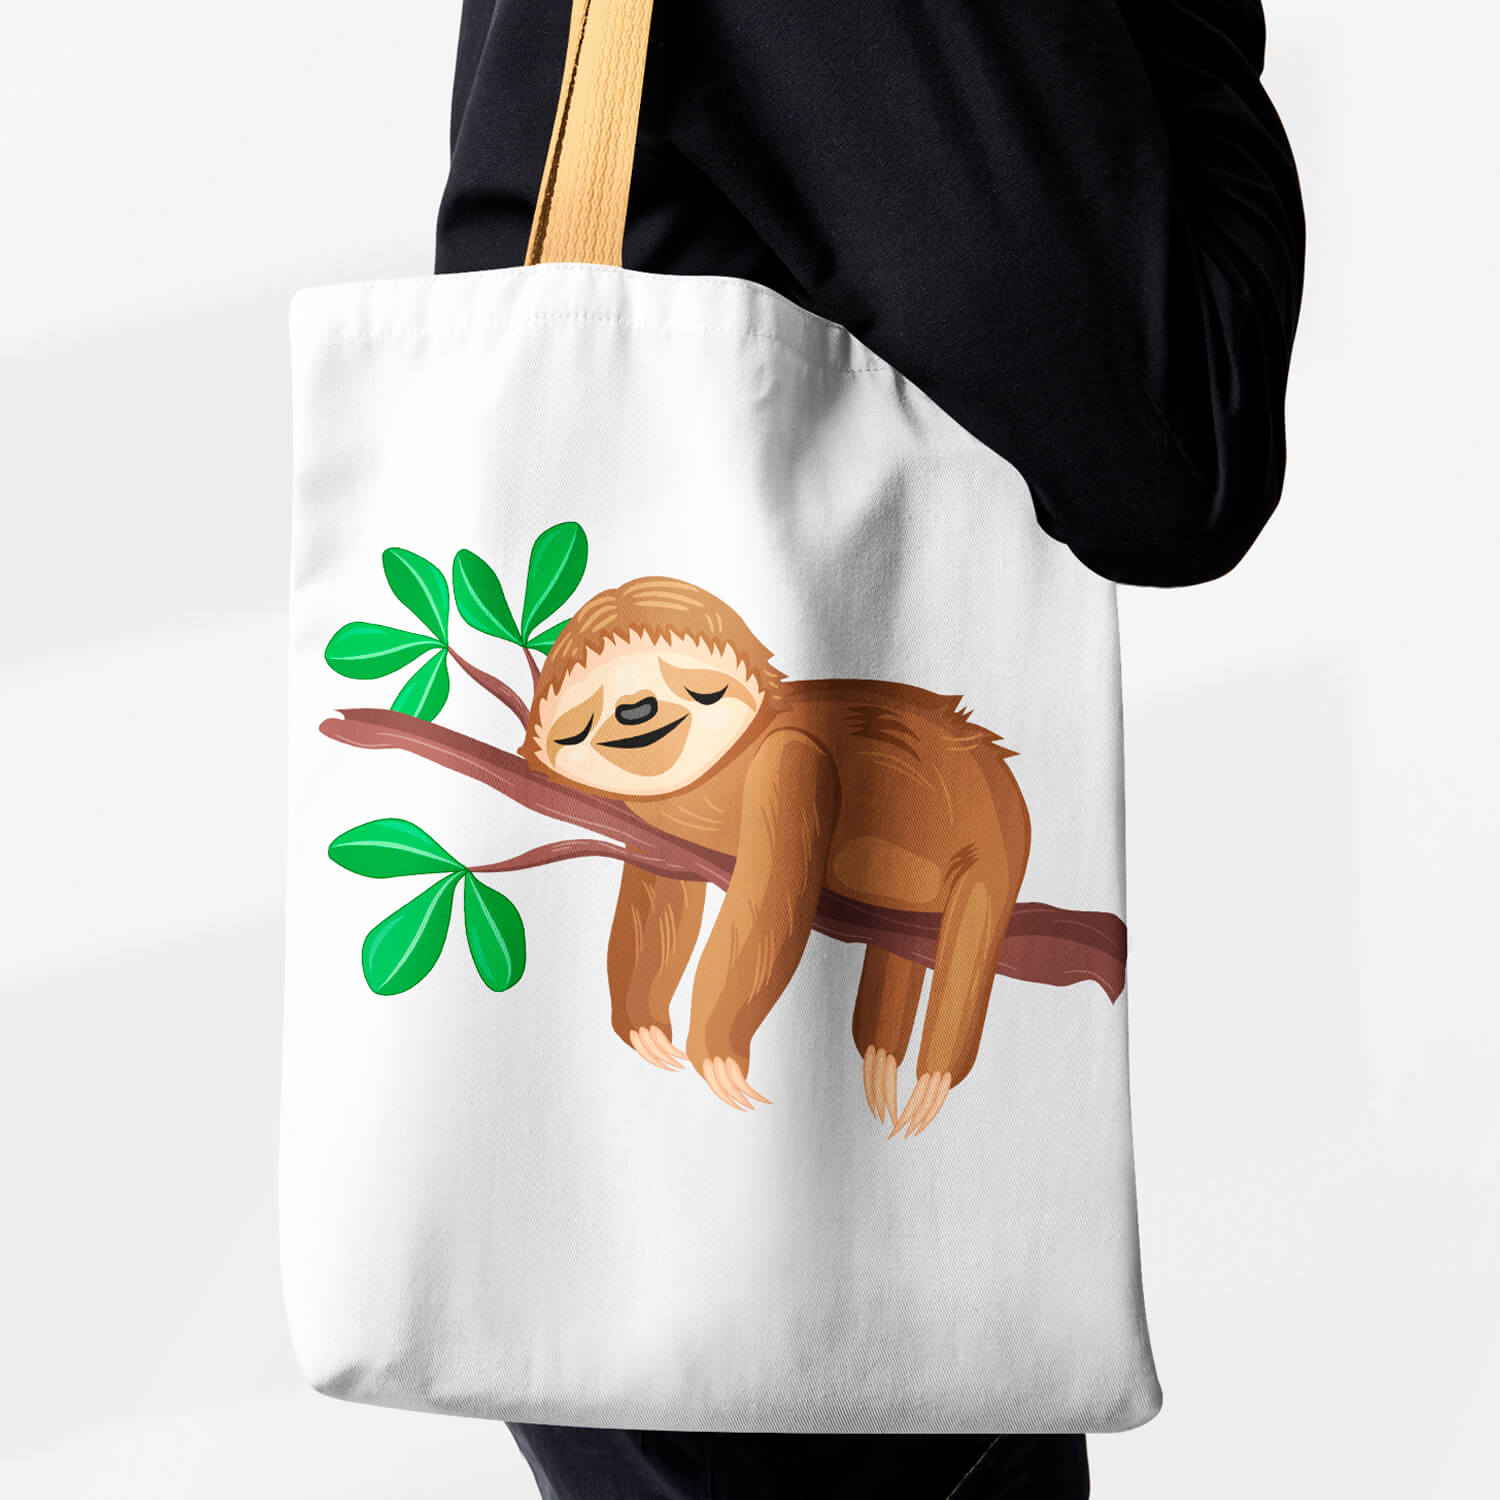 Woman carrying a tote bag with a slotty sleeping on a tree branch.